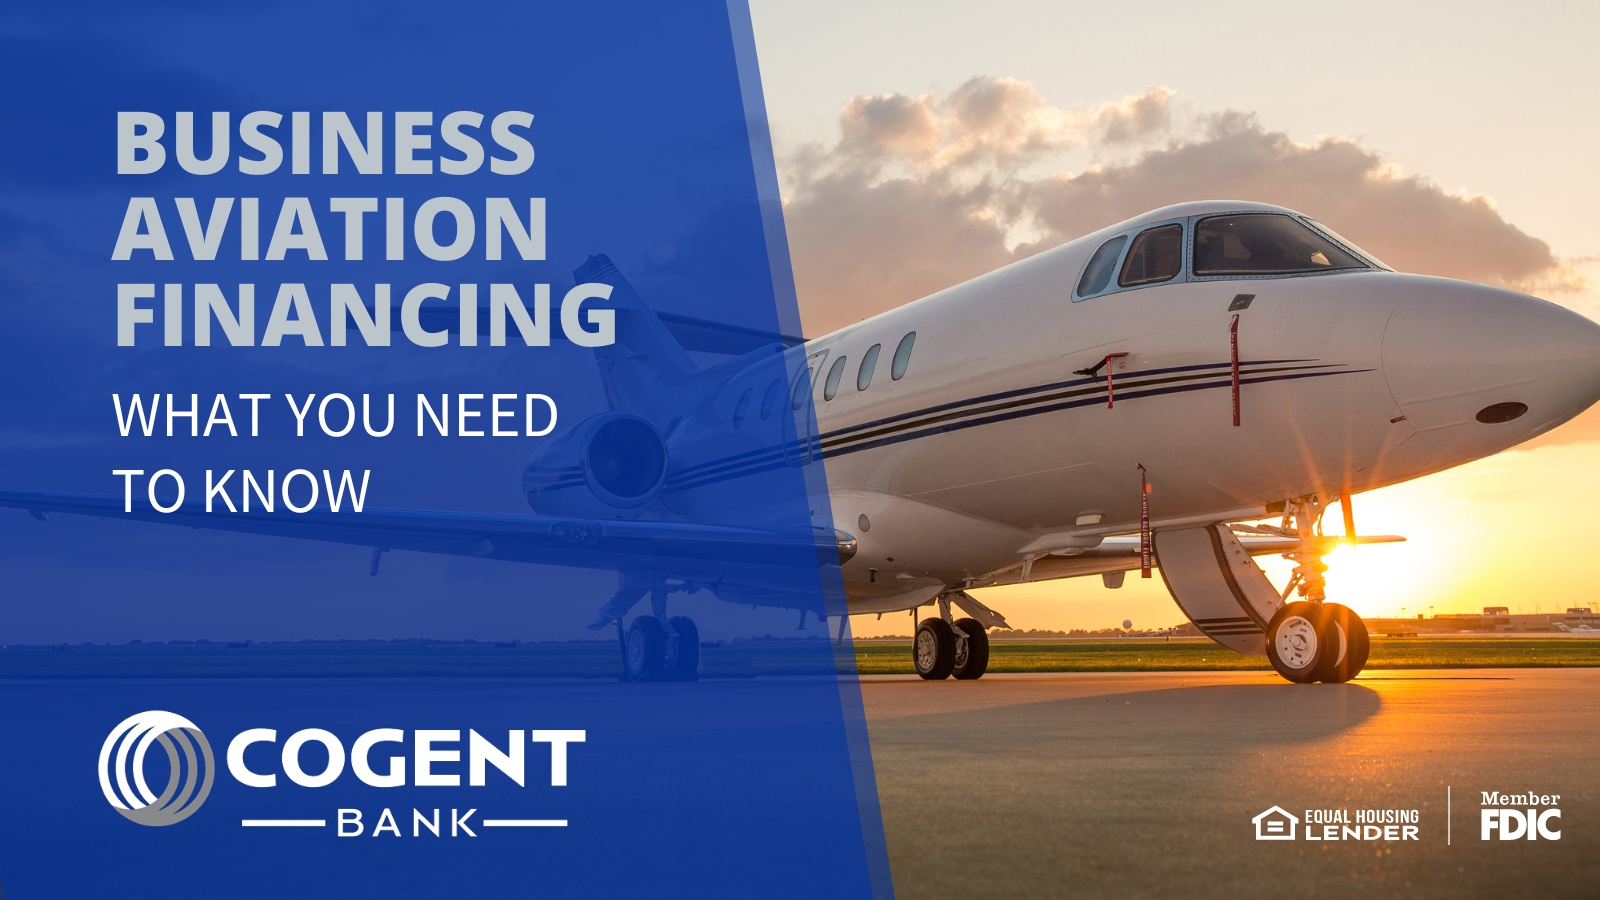 Business Aviation Financing: What You Need To Know